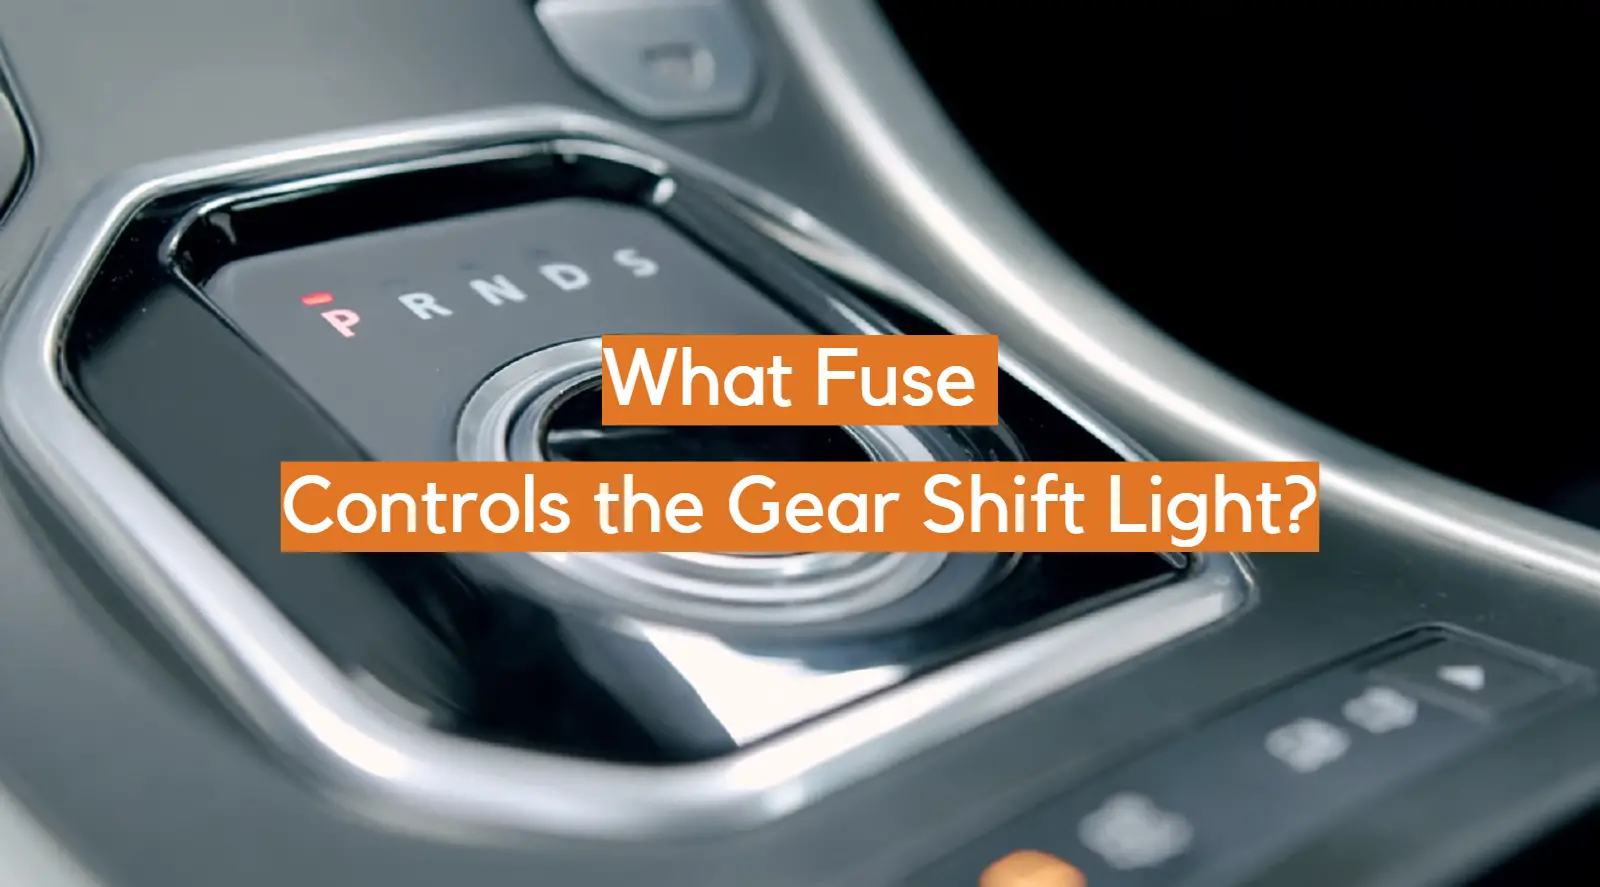 What Fuse Controls the Gear Shift Light?